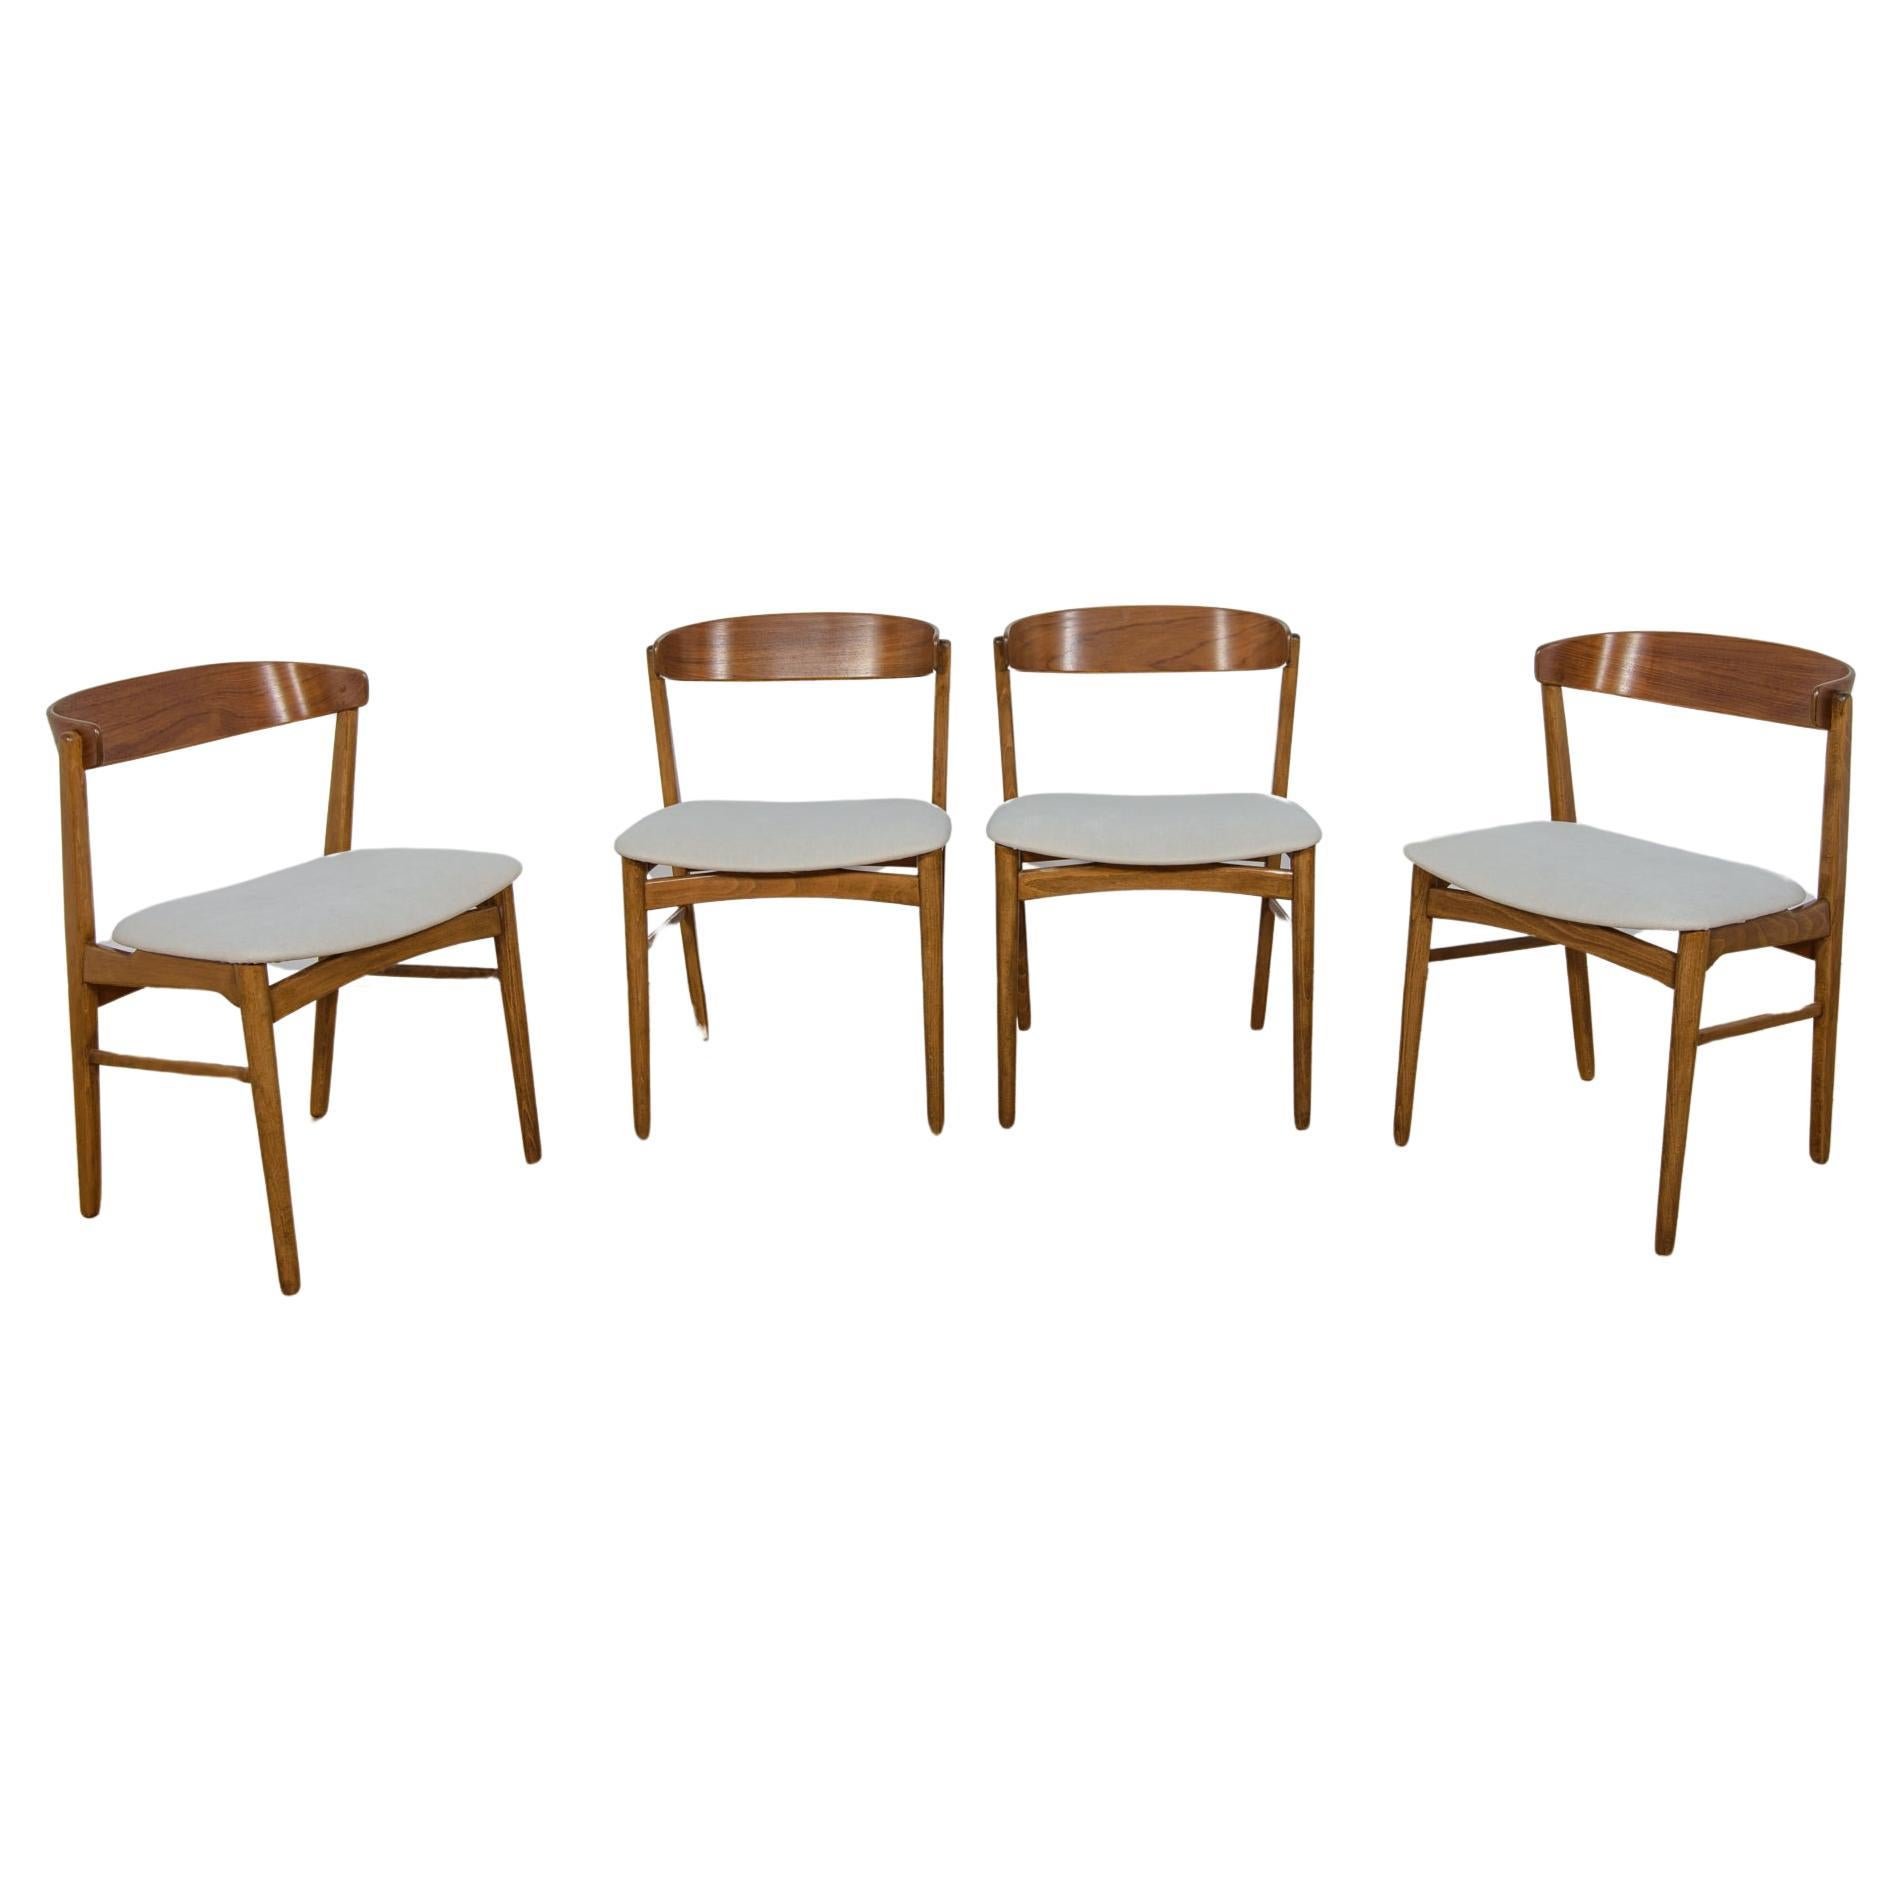 Mid-Century Model 206 Dining Chairs from Farstrup Furniture, 1960s, Denmark.